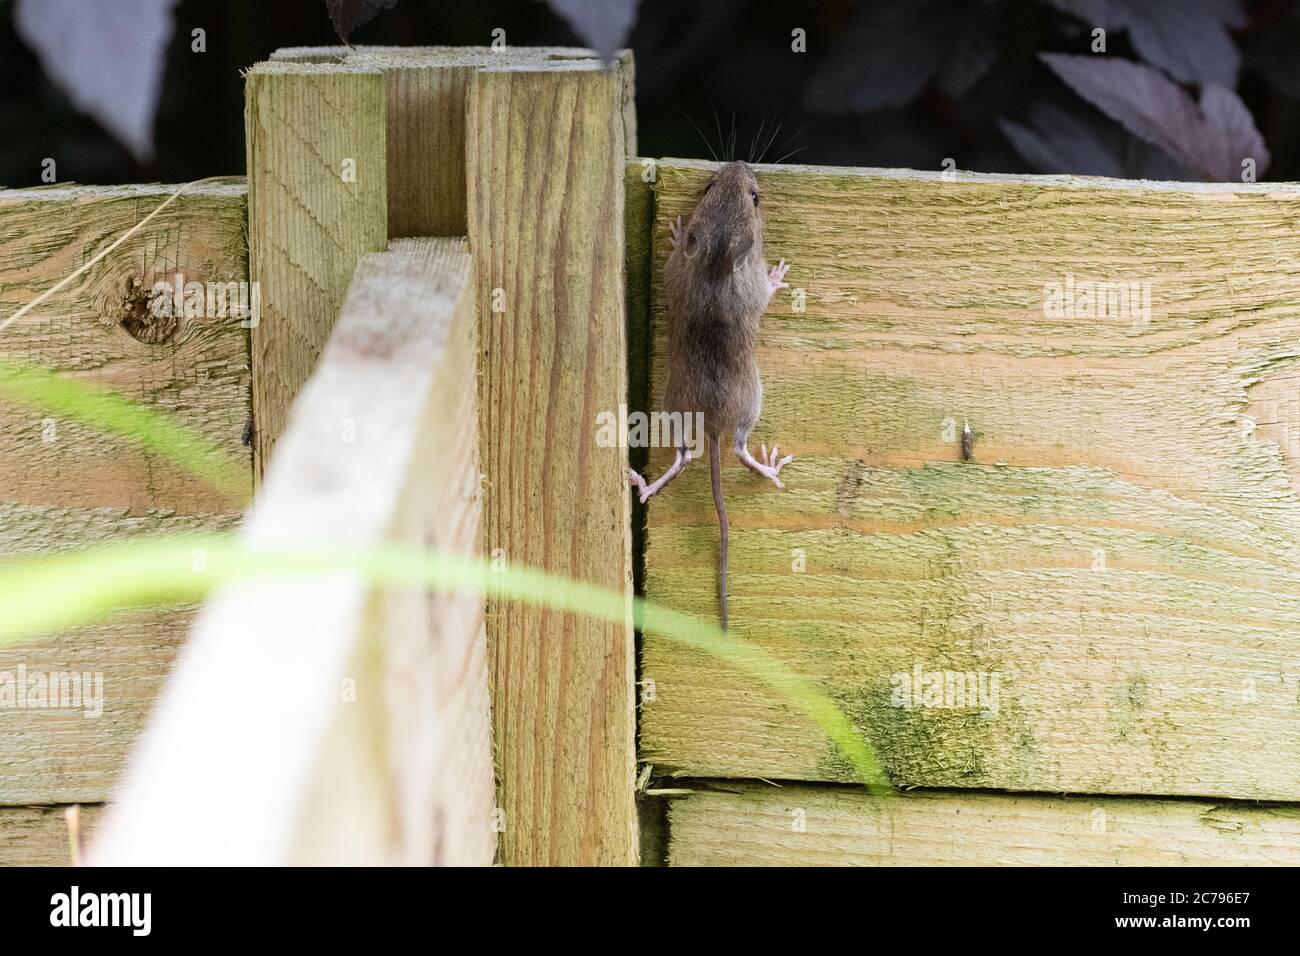 Field mouse also known as a Wood mouse Apodemus sylvaticus climbing out of wooden compost bin when disturbed during turning - Scotland, UK Stock Photo